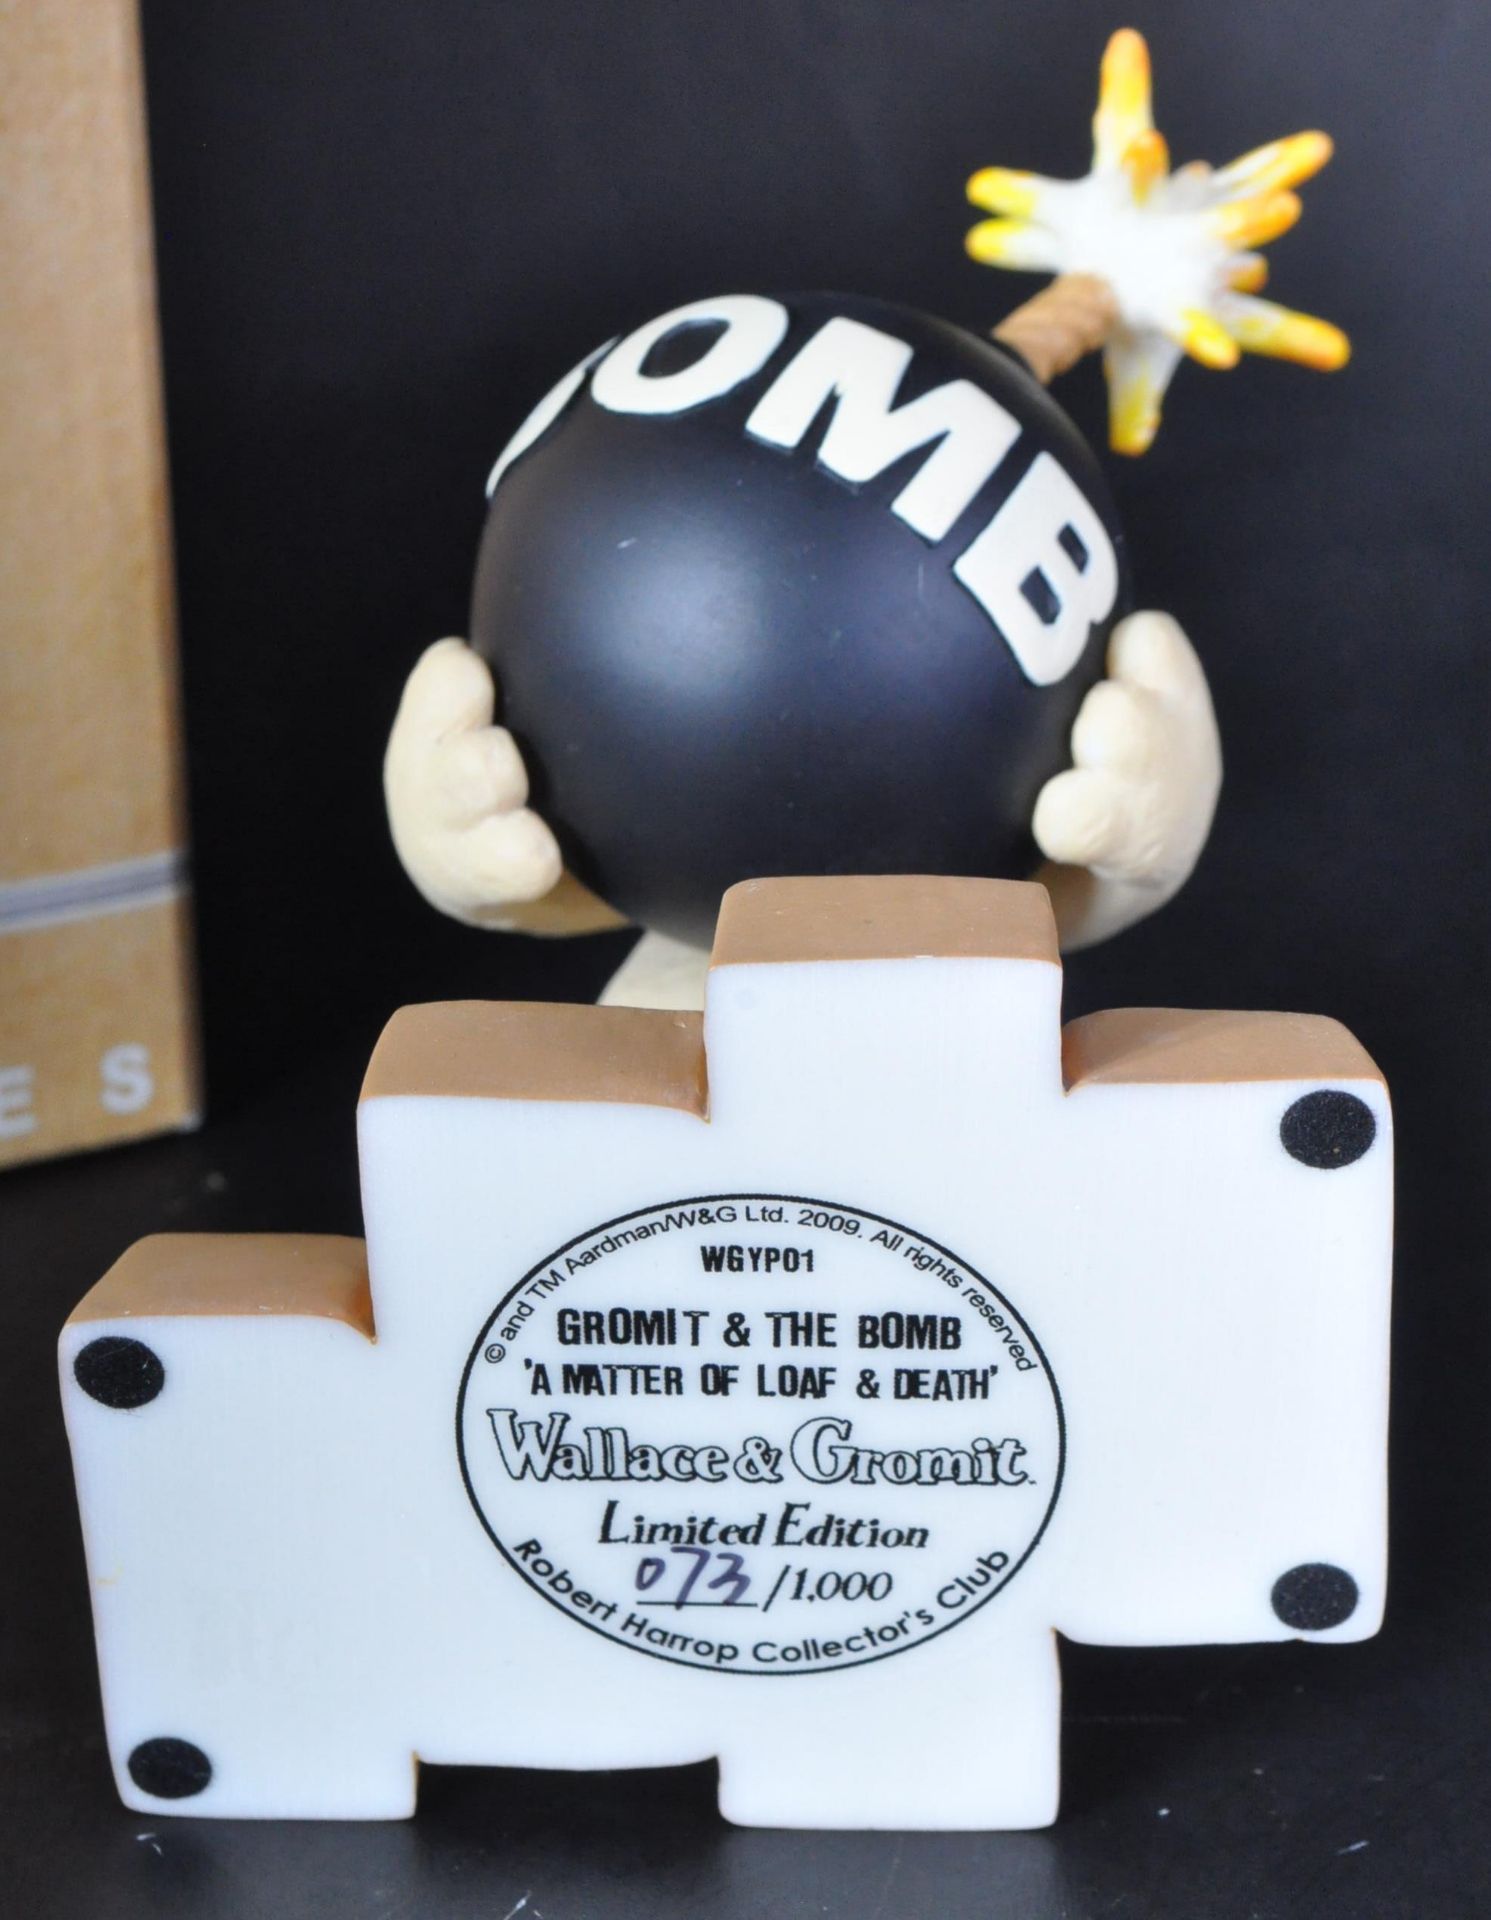 WALLACE & GROMIT - ROBERT HARROP - LIMITED EDITION FIGURINE - Image 5 of 6